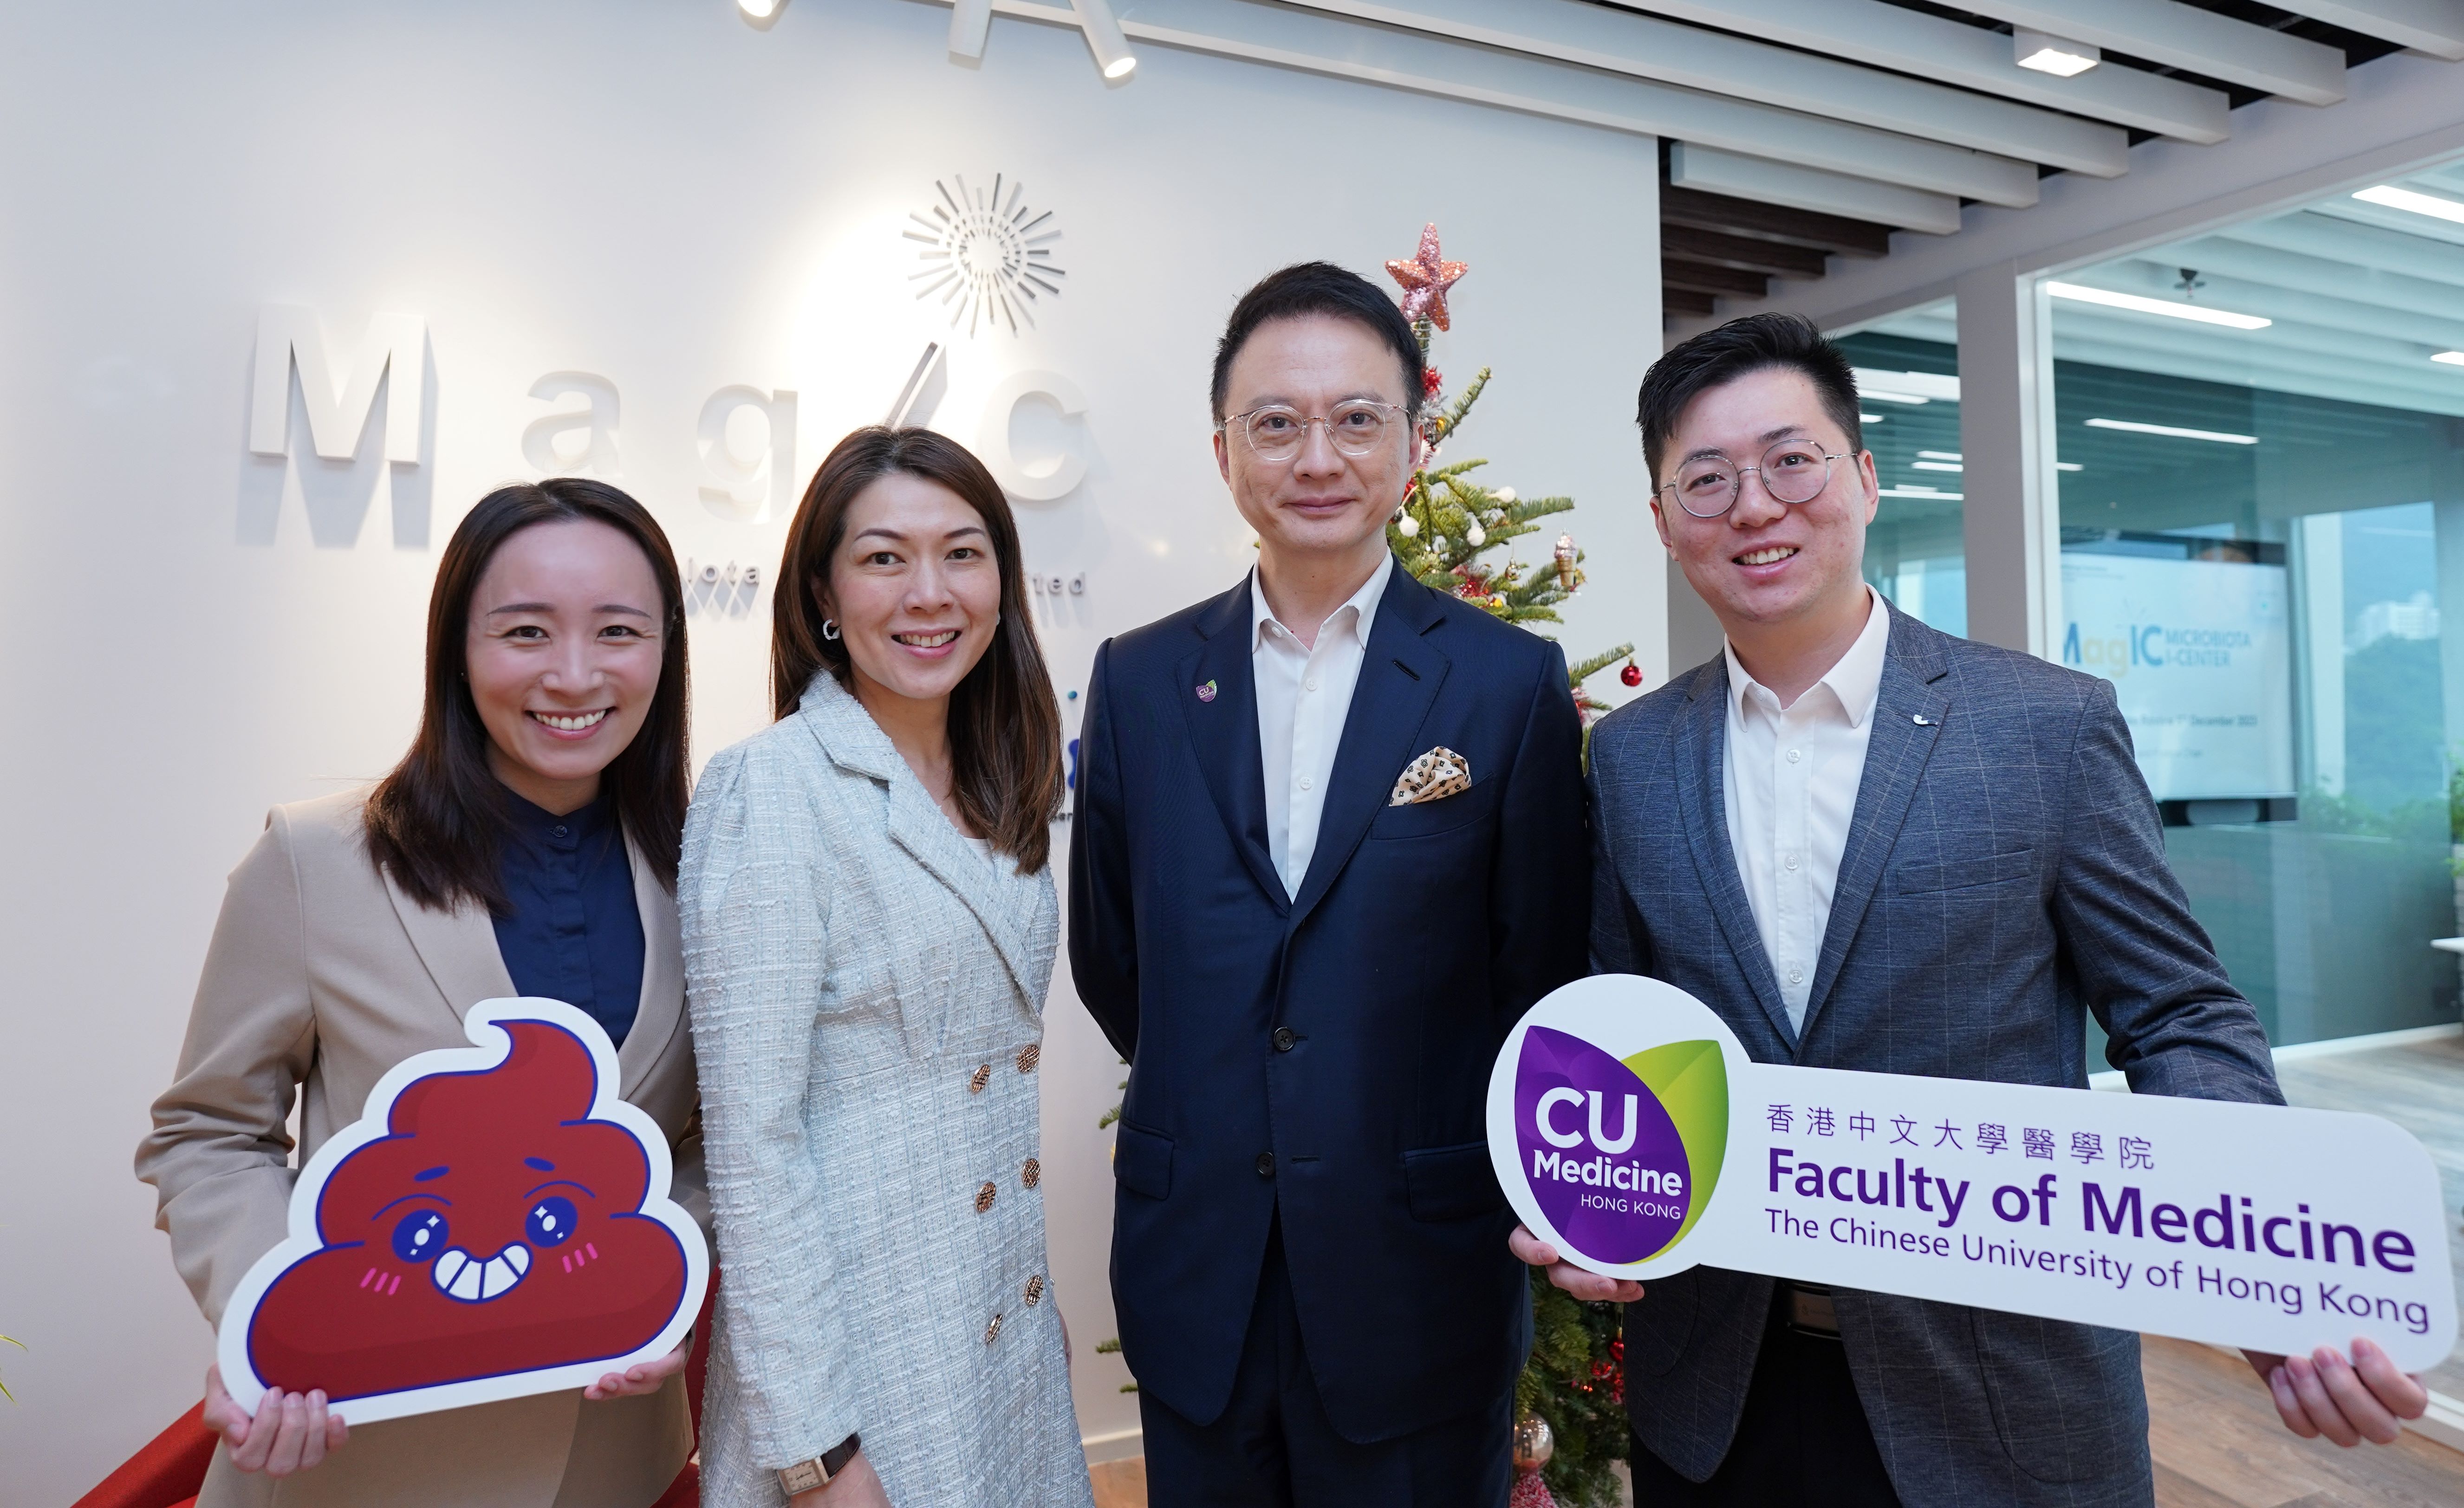 Featured are the research team members. (From left) Miss Raphaela Iris Lau, co-first author of the study and a Hong Kong PhD Fellow at CU Medicine; Professor Siew Ng, Croucher Professor of Medical Sciences at CU Medicine and Director of MagIC; Professor Francis Chan, Dean of Medicine; and Professor Su Qi, co-first author of the study and Research Assistant Professor at the Department of Medicine and Therapeutics of CU Medicine. 